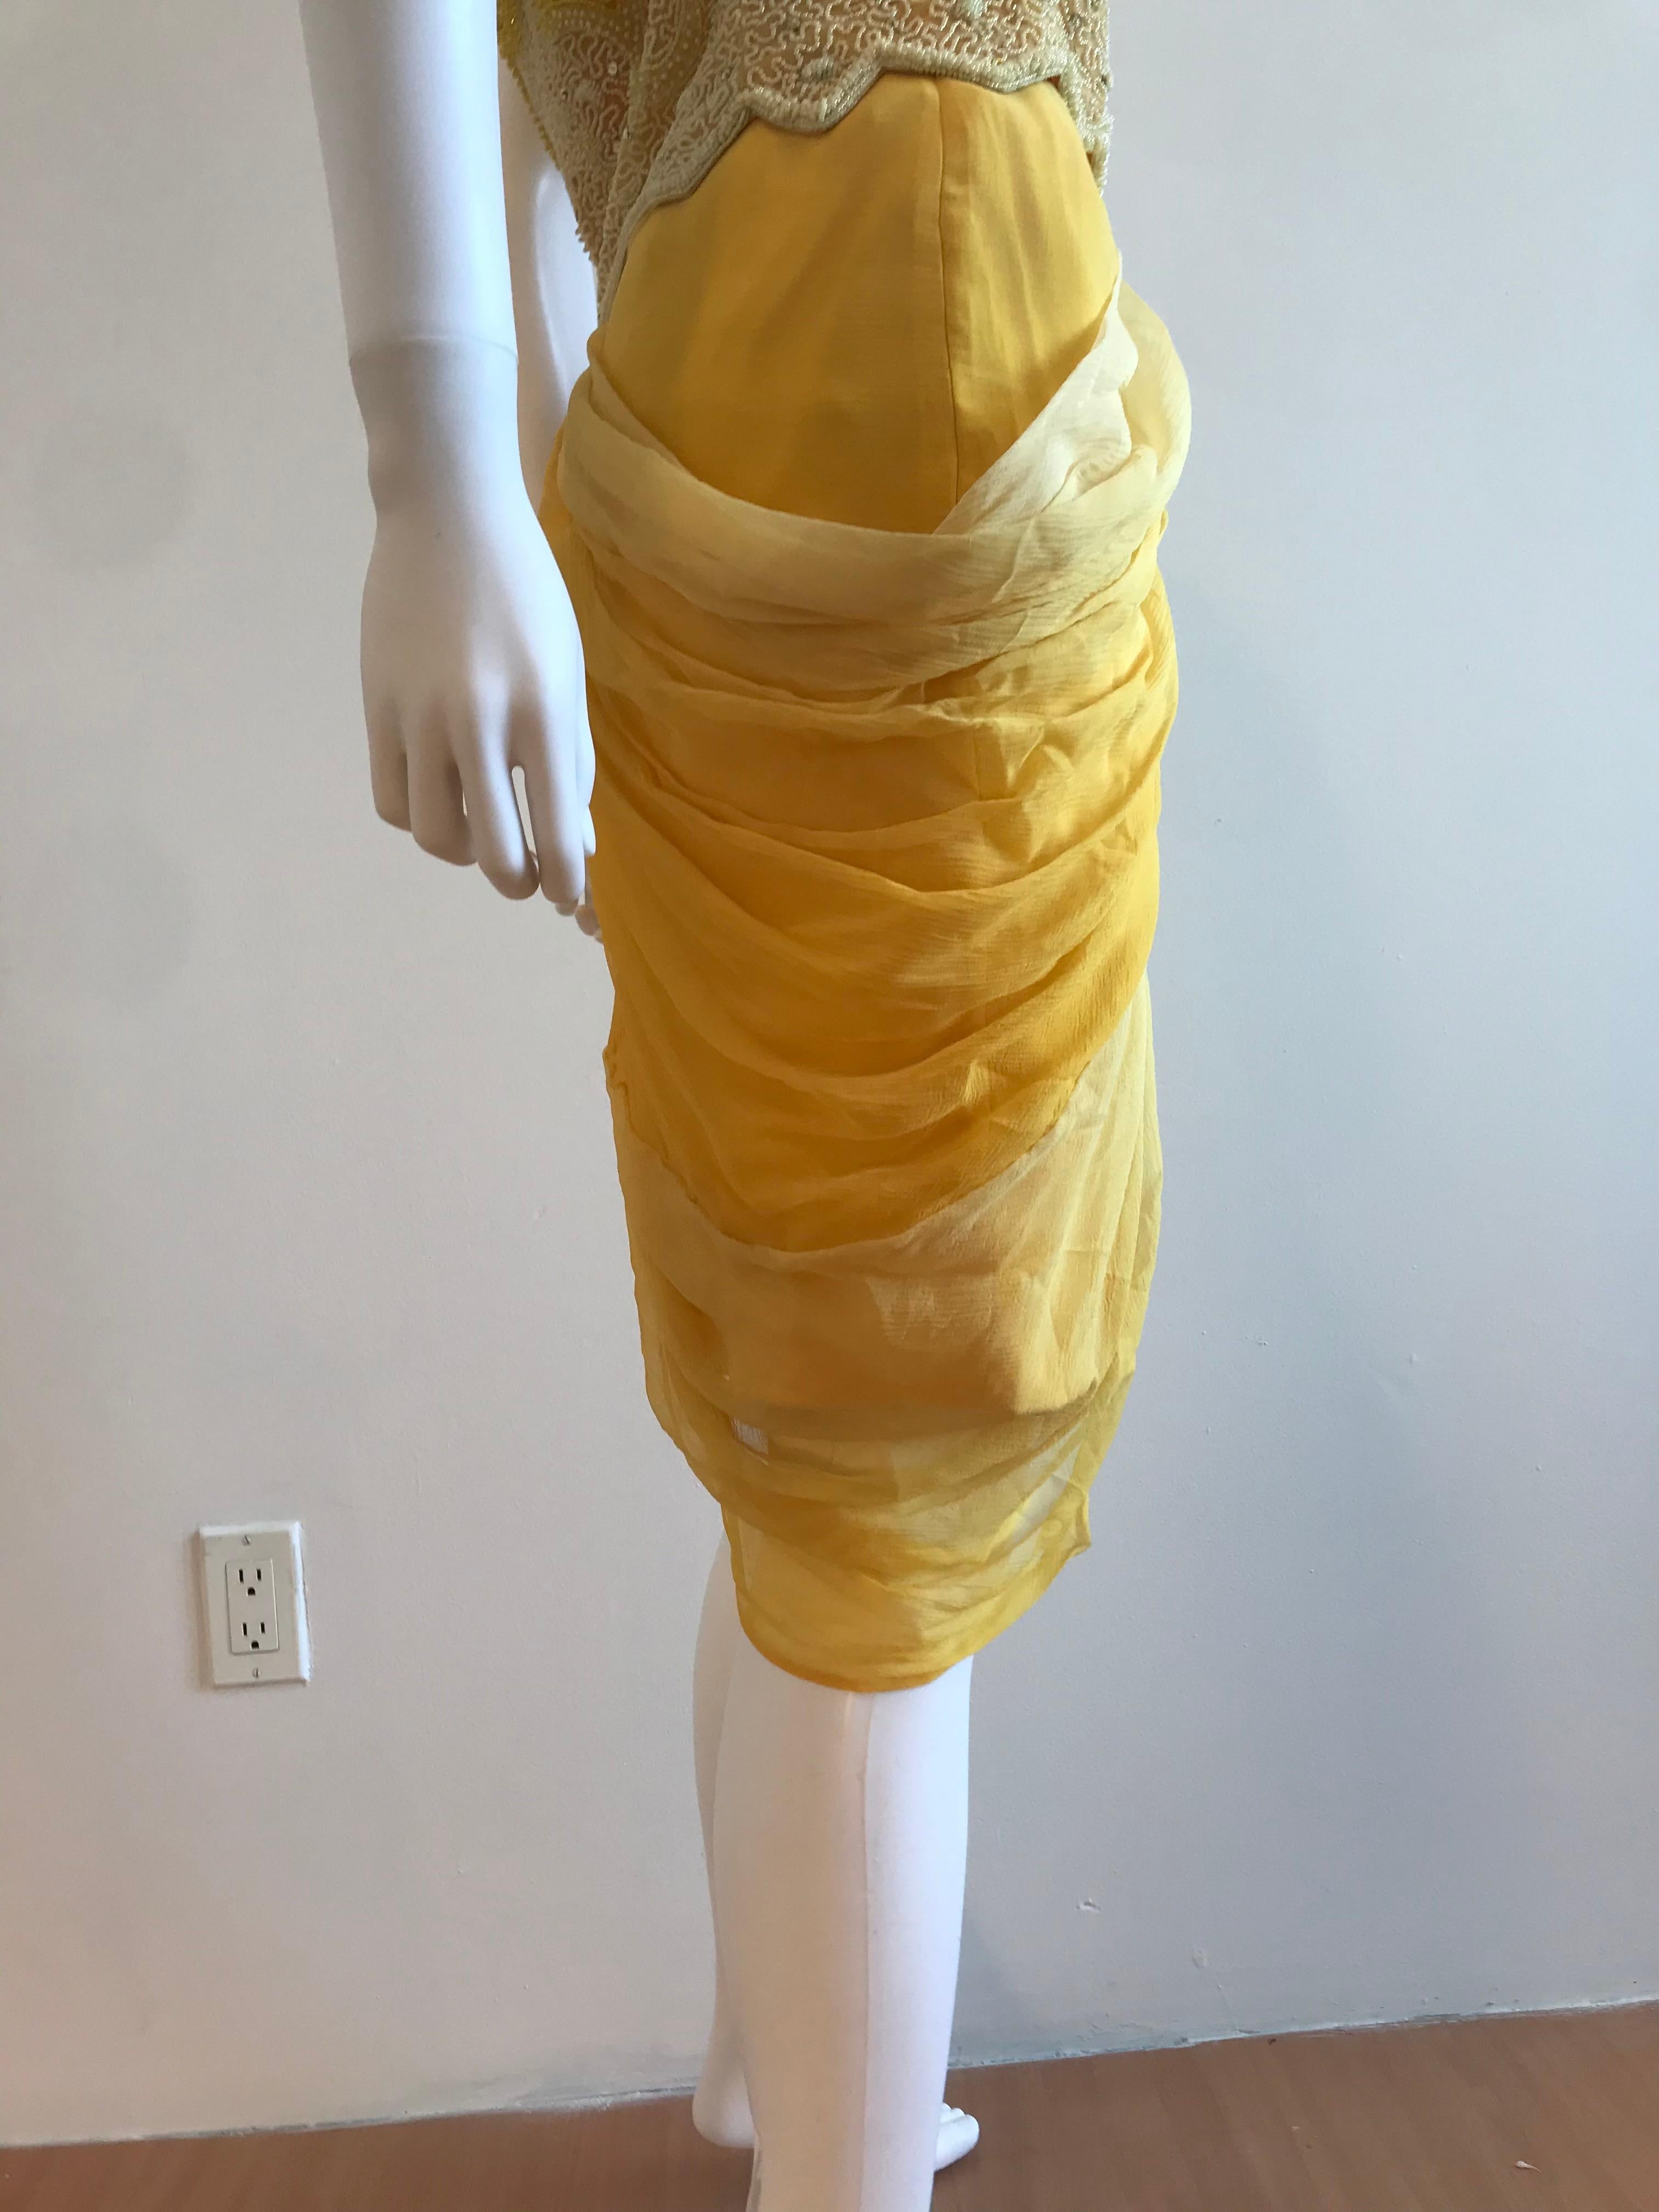 Gianni Versace for Genny Yellow Beaded Jacket and Chiffon Skirt Ensemble For Sale 4